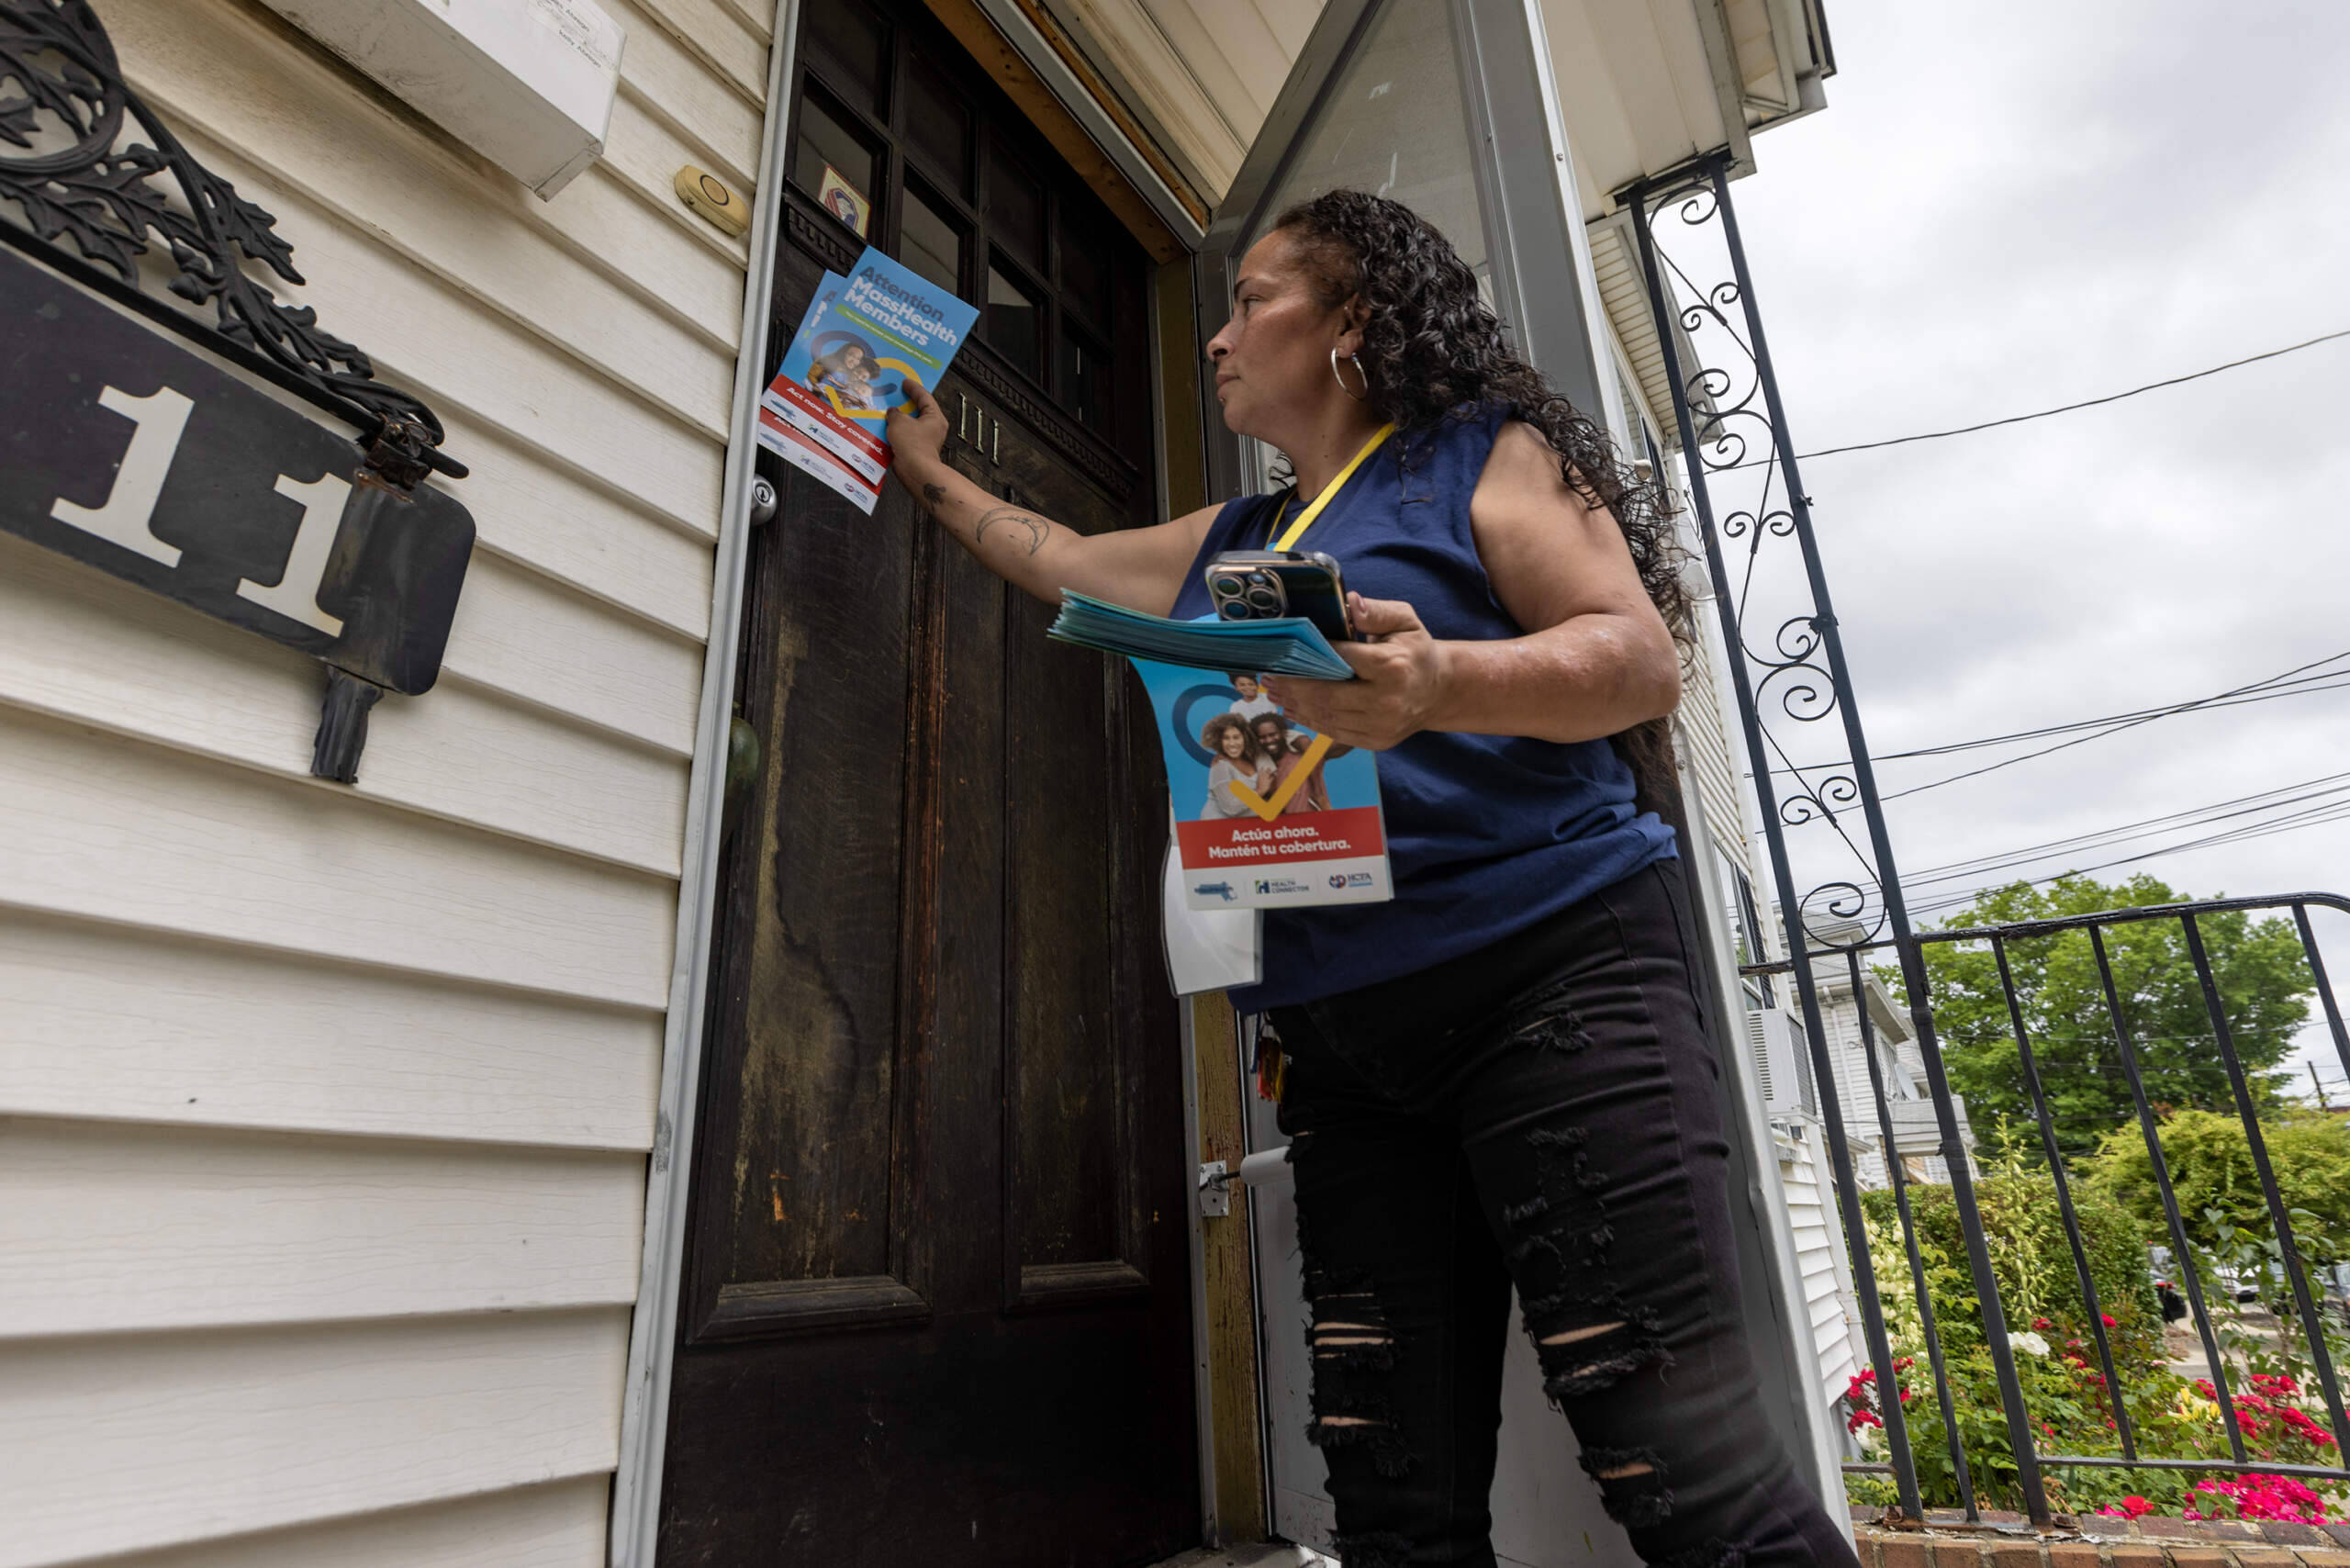 Outreach worker Carrie Perez leaves information about MassHealth at the door of a home in Revere. (Jesse Costa/WBUR)